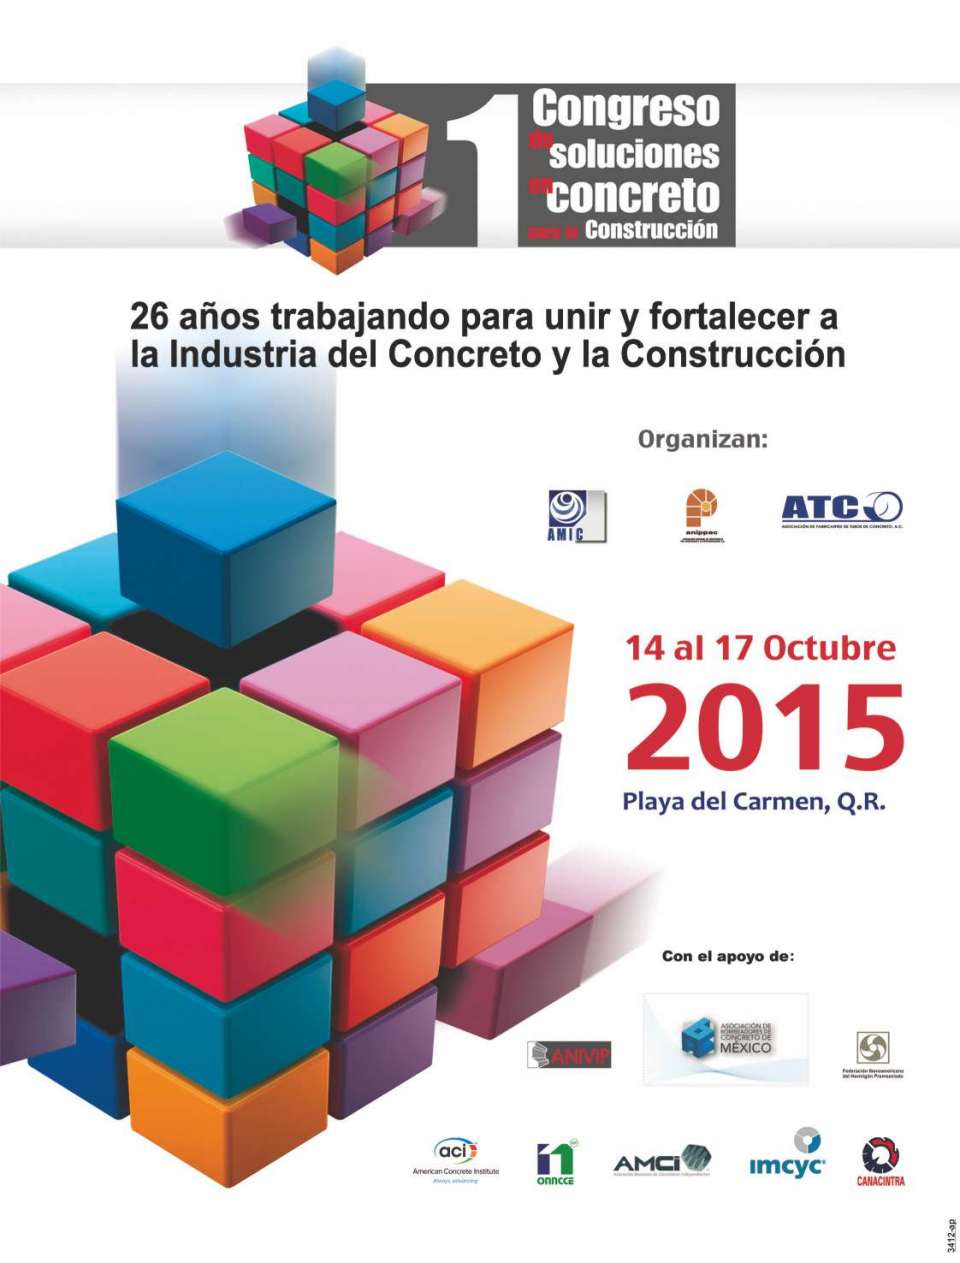 First Congress of Concrete Solutions for Construction. Hotel Paradisus Playa del Carmen La Perla from October 14 to 17, 2015 Expo AMIC